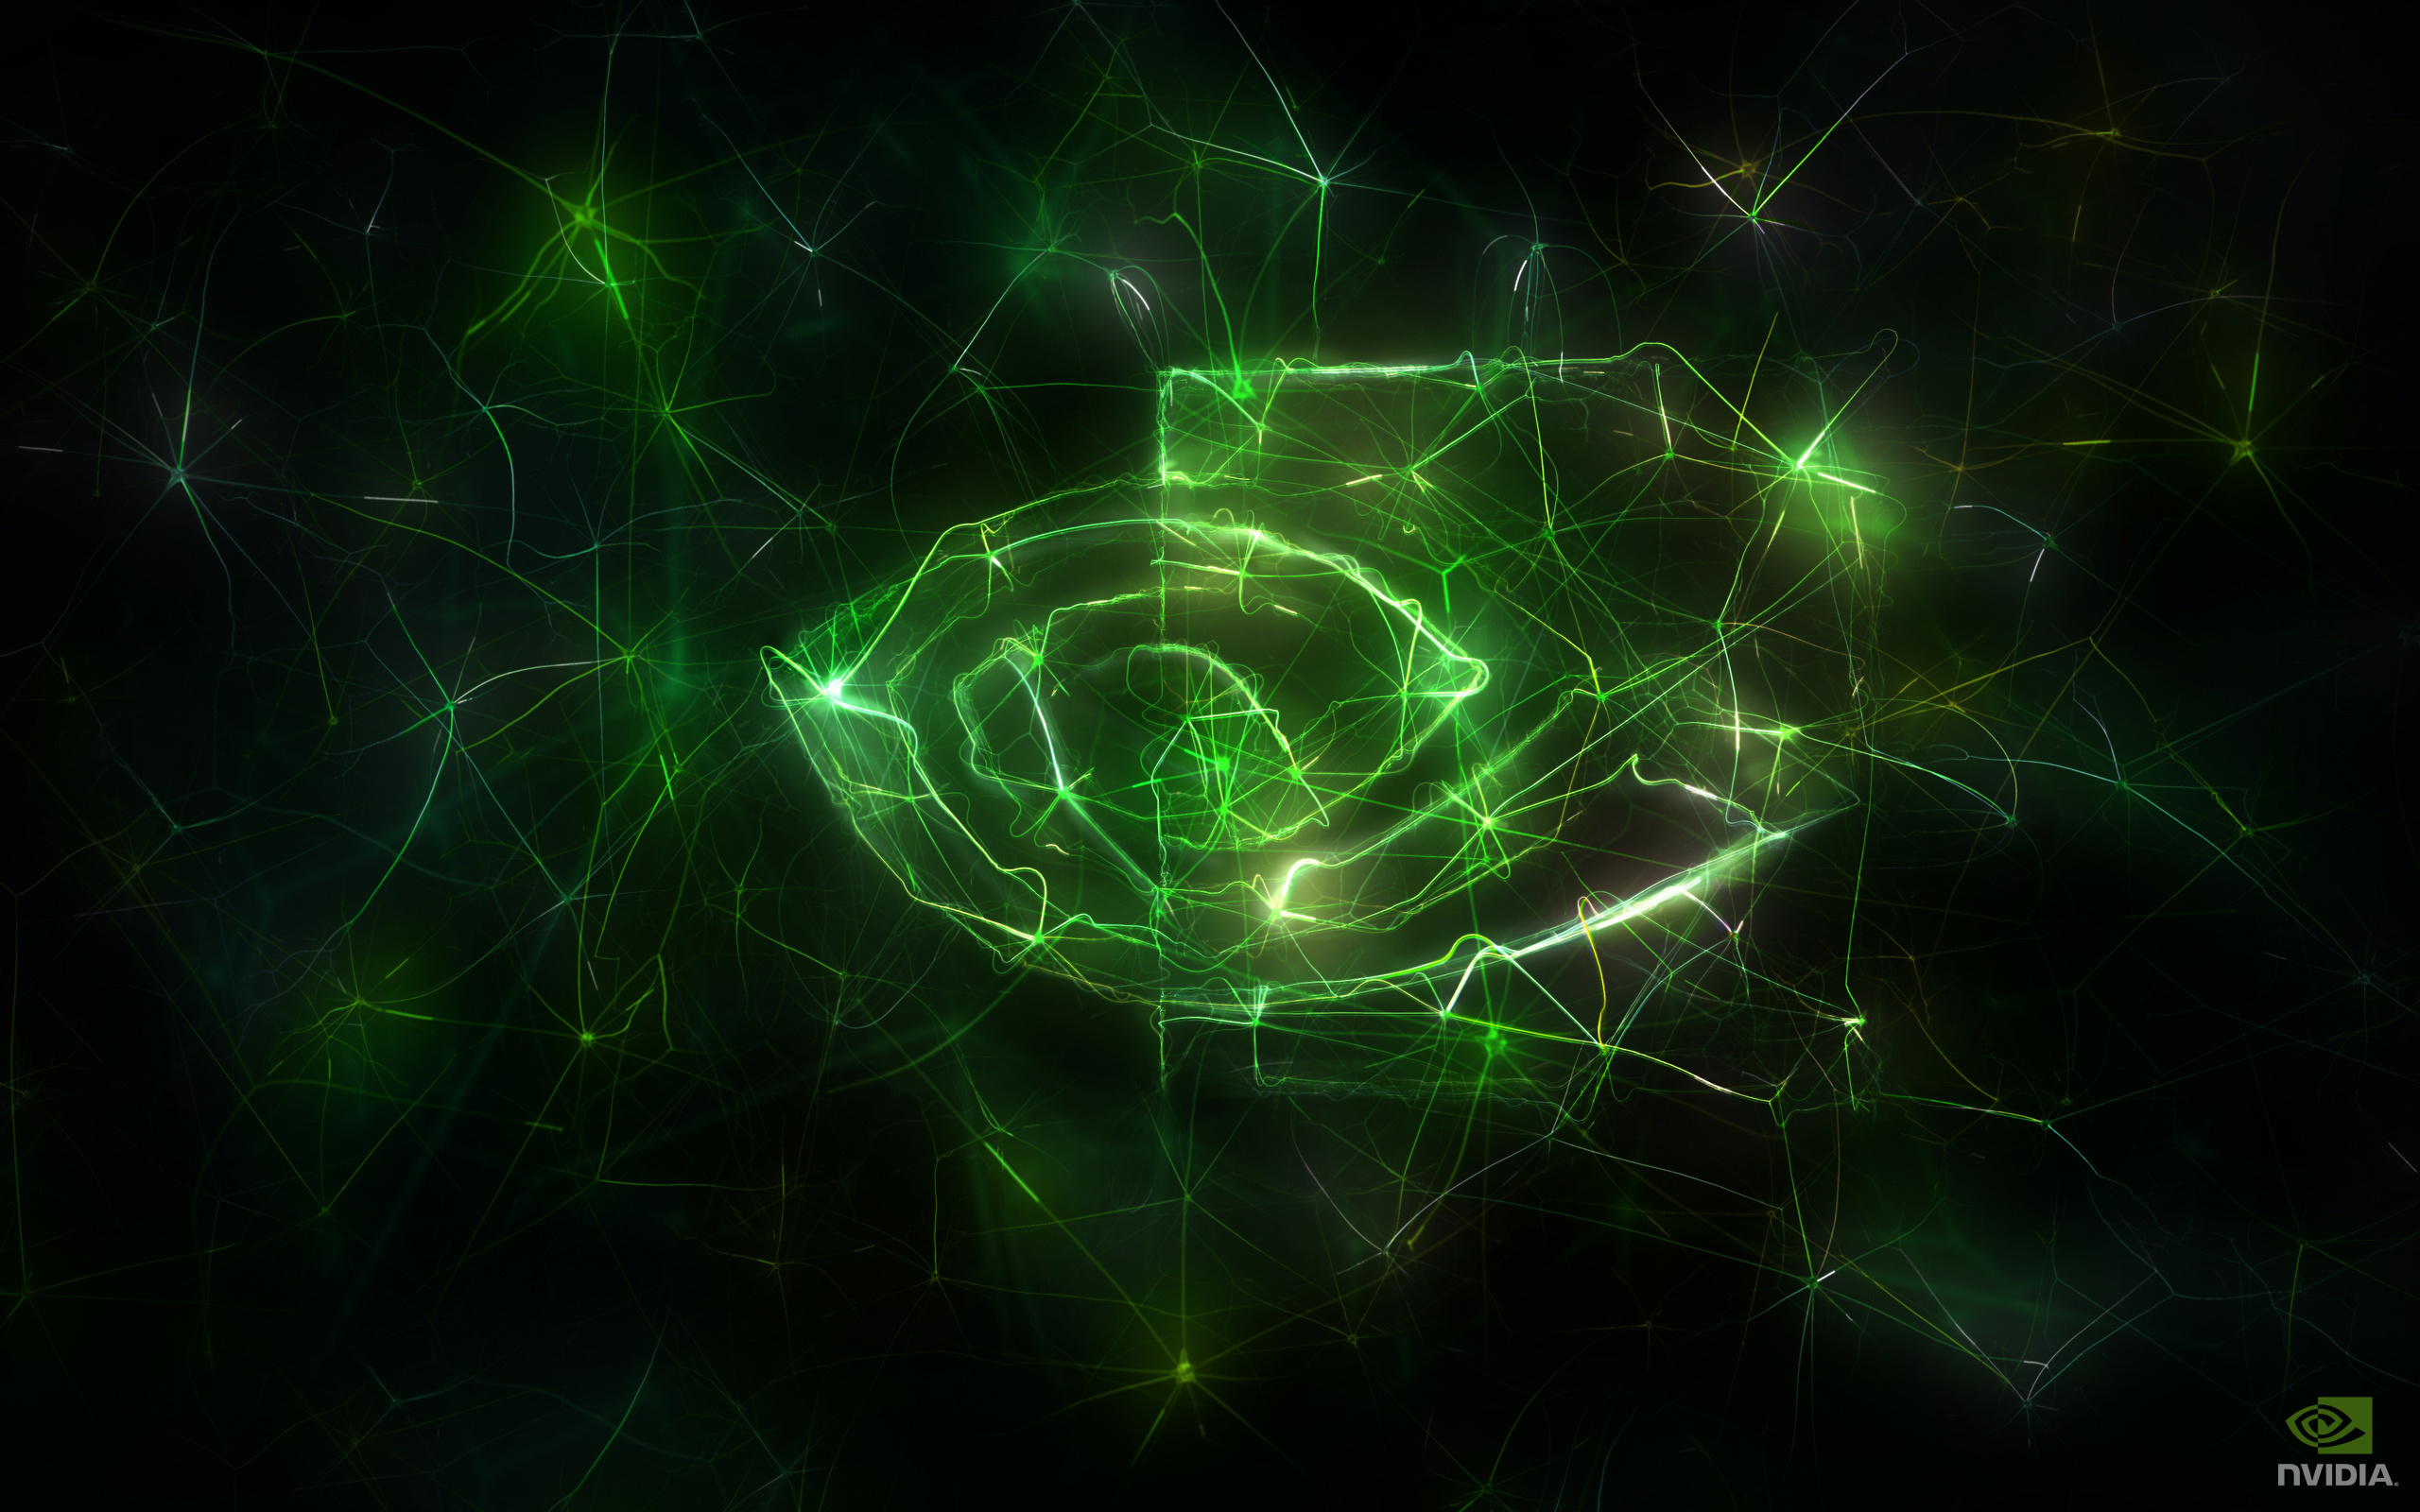 Nvidia: Founded in 1993, A leading designer of graphics processors. 2560x1600 HD Wallpaper.